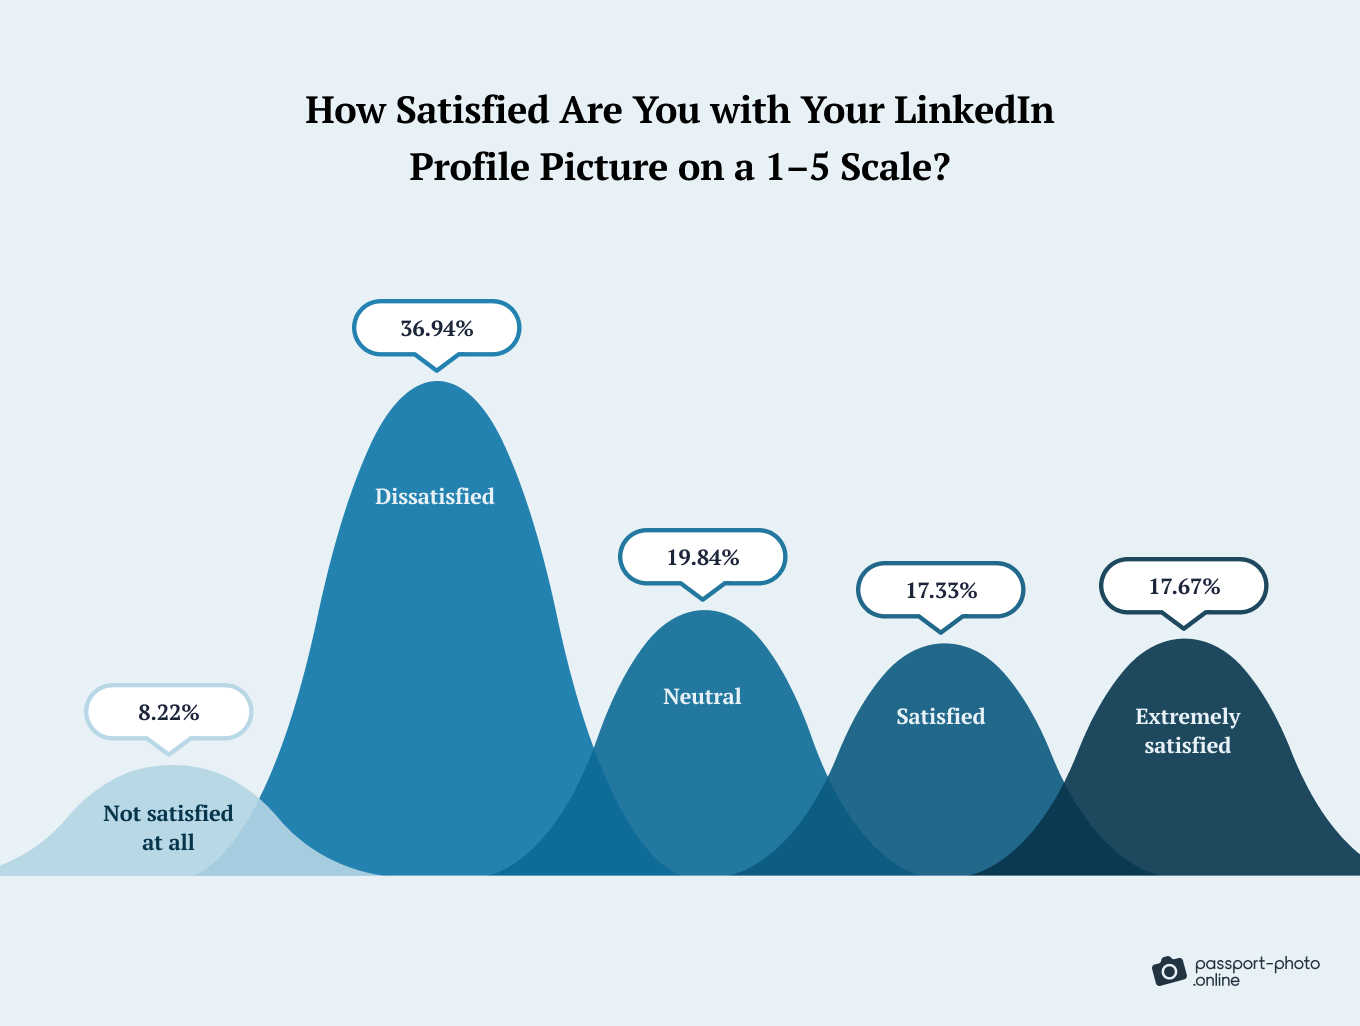 Over a third of respondents are dissatisfied with their LinkedIn profile picture, and a small fraction are not satisfied at all